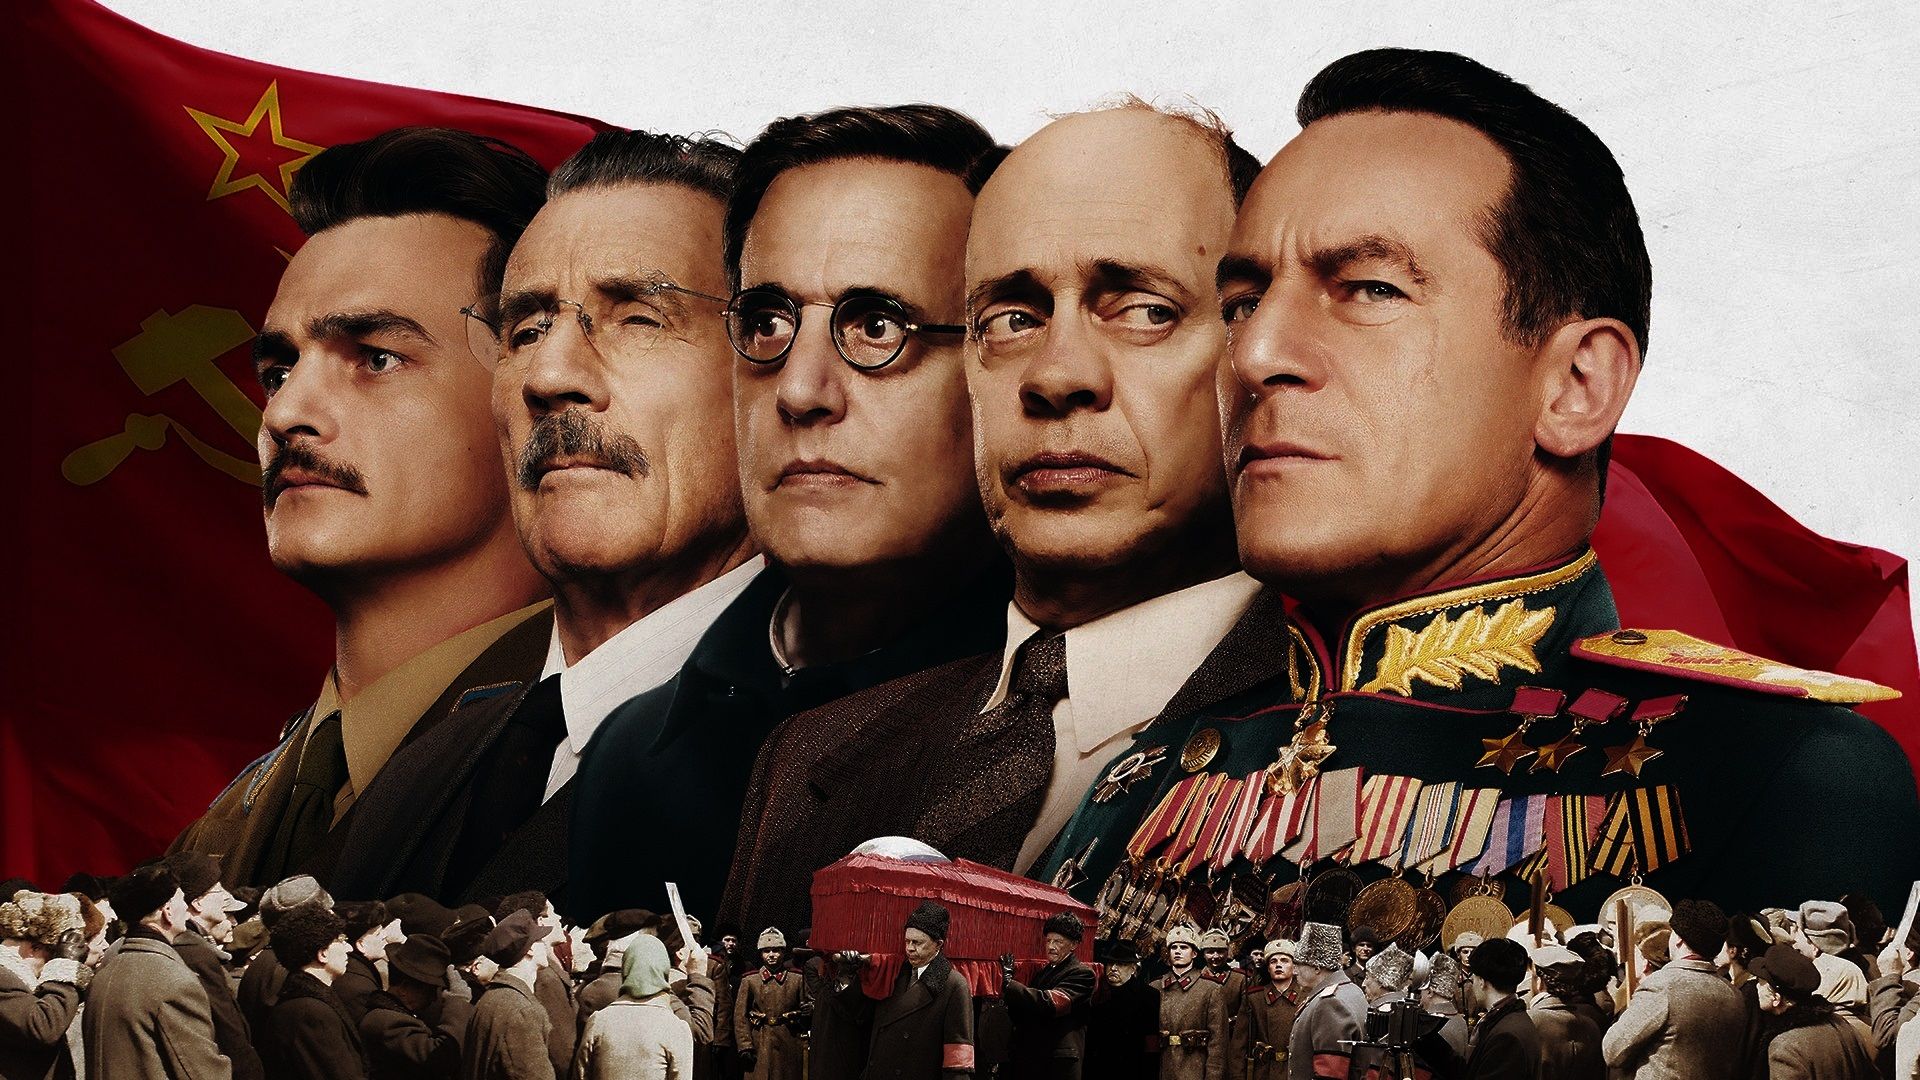 The Death of Stalin background